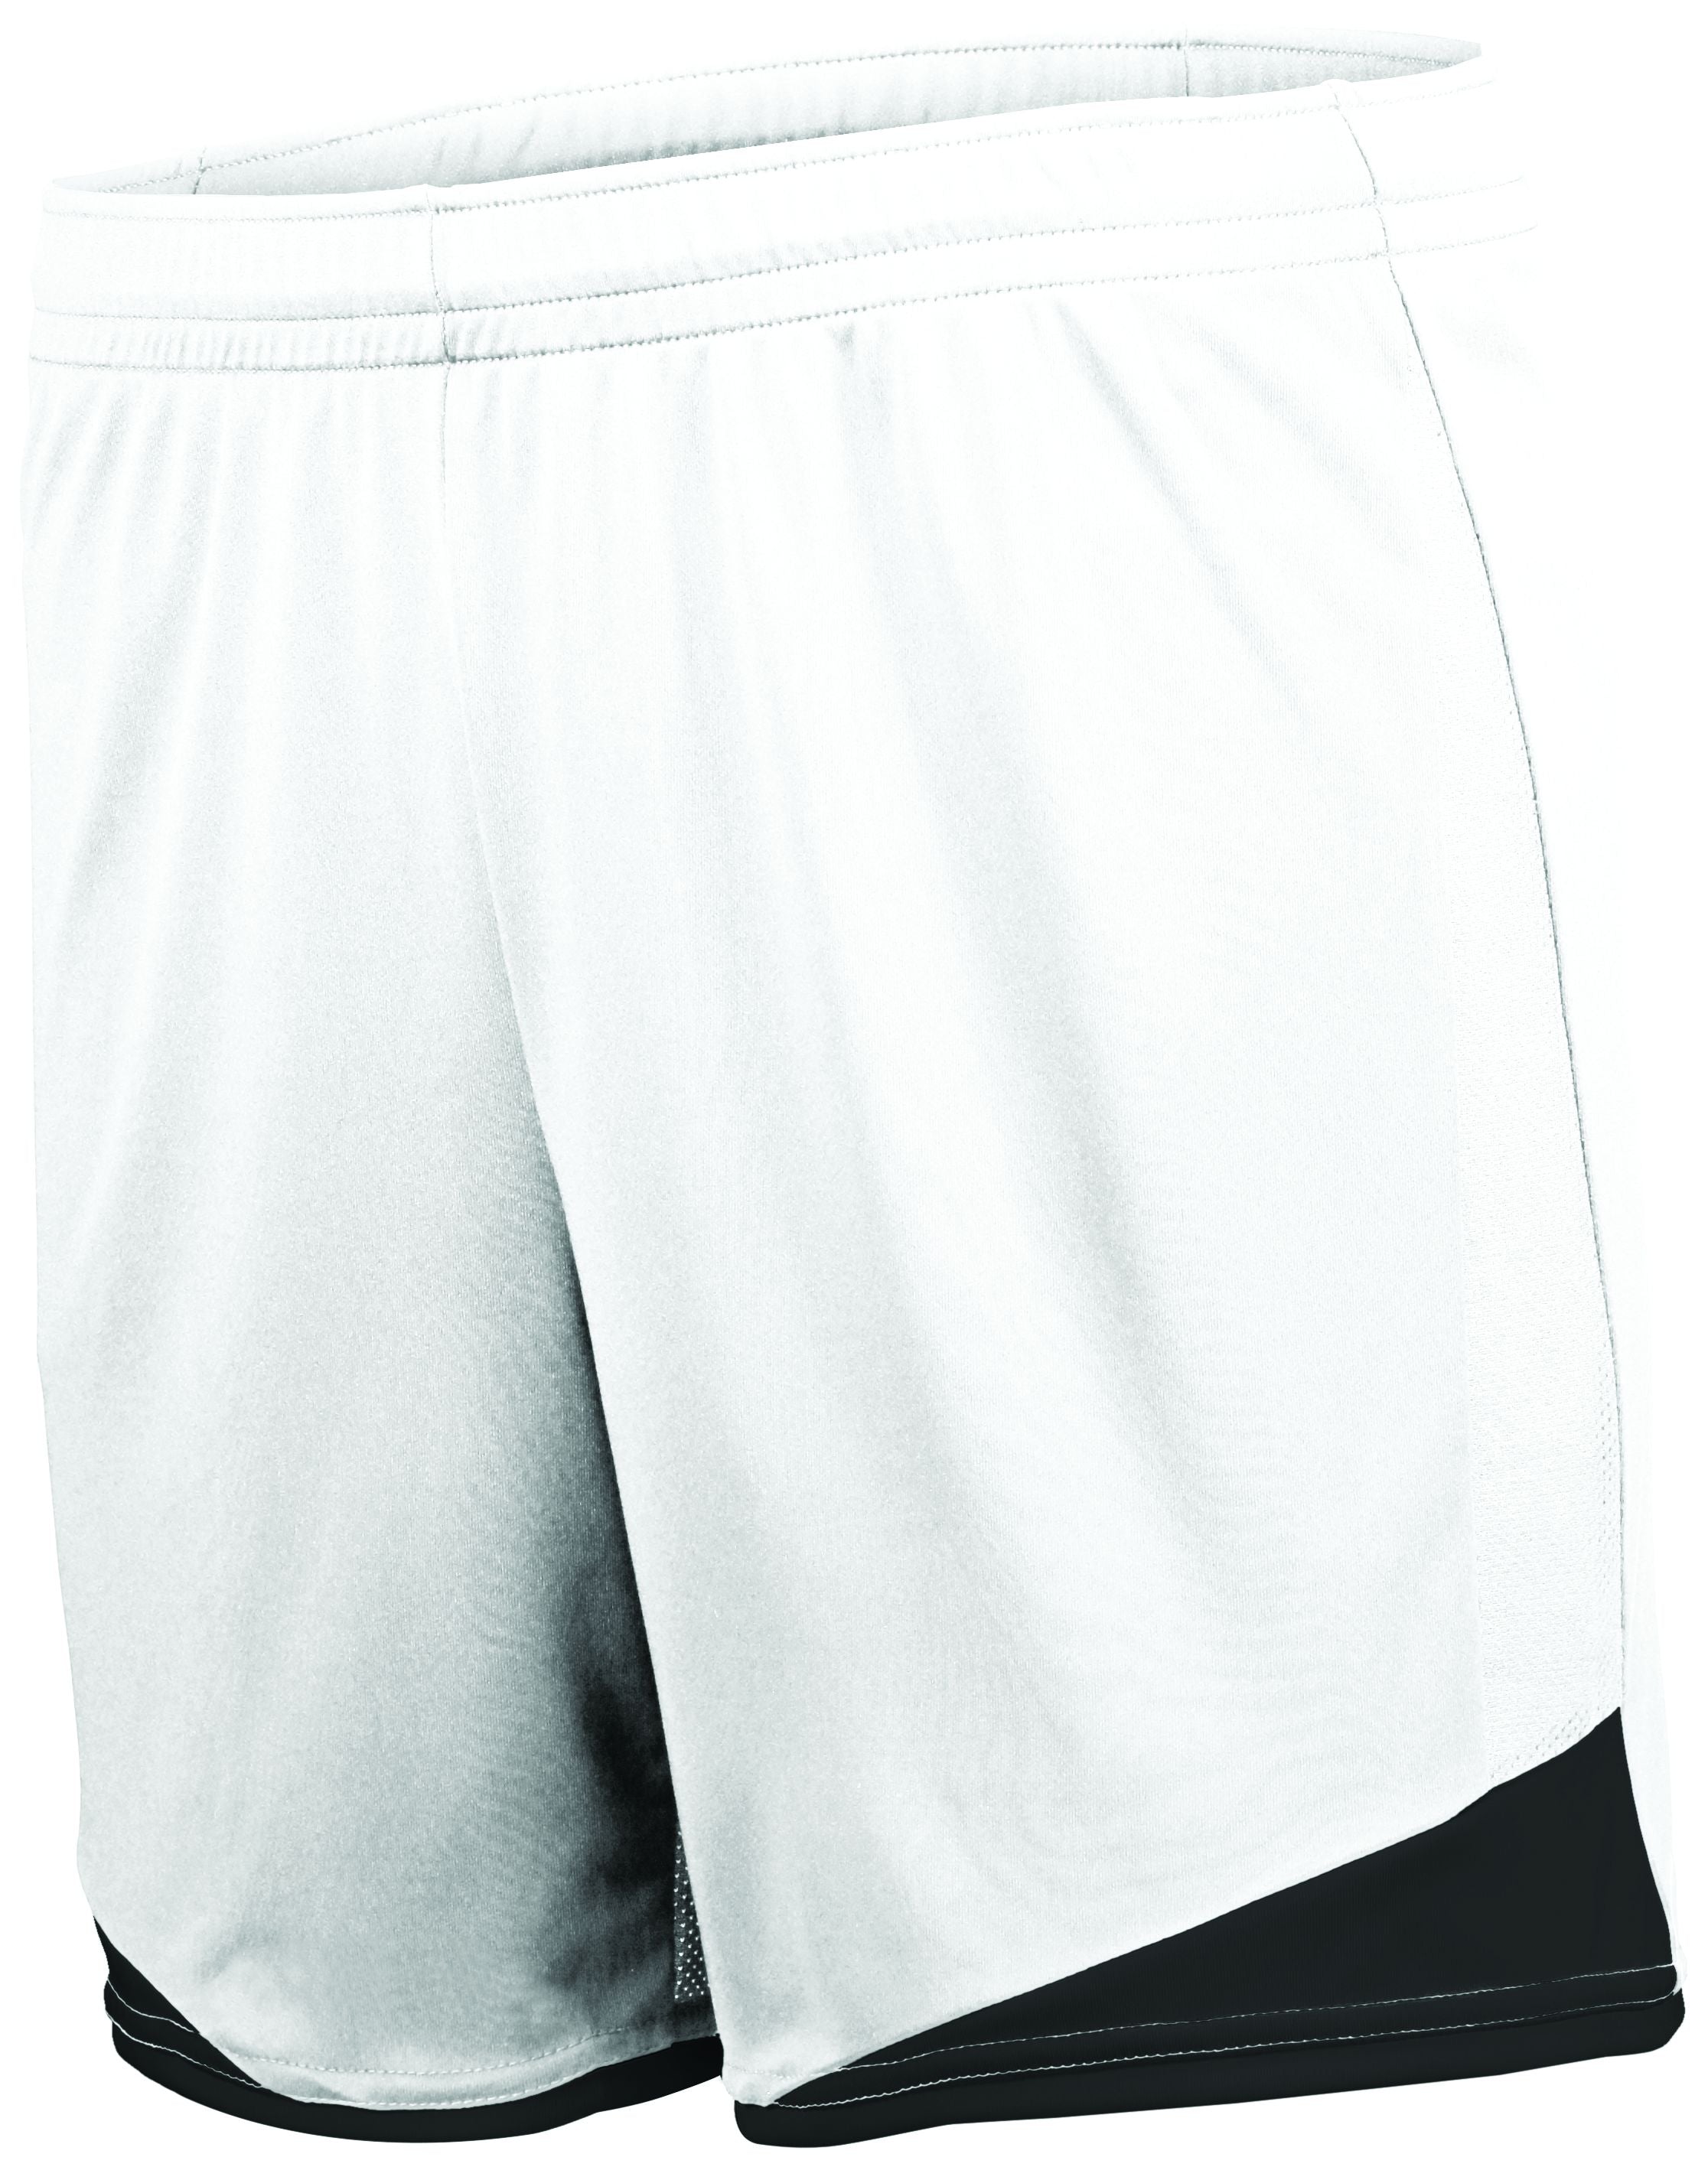 High 5 Ladies Stamford Soccer Shorts in White/Black  -Part of the Ladies, Ladies-Shorts, High5-Products, Soccer, All-Sports-1 product lines at KanaleyCreations.com